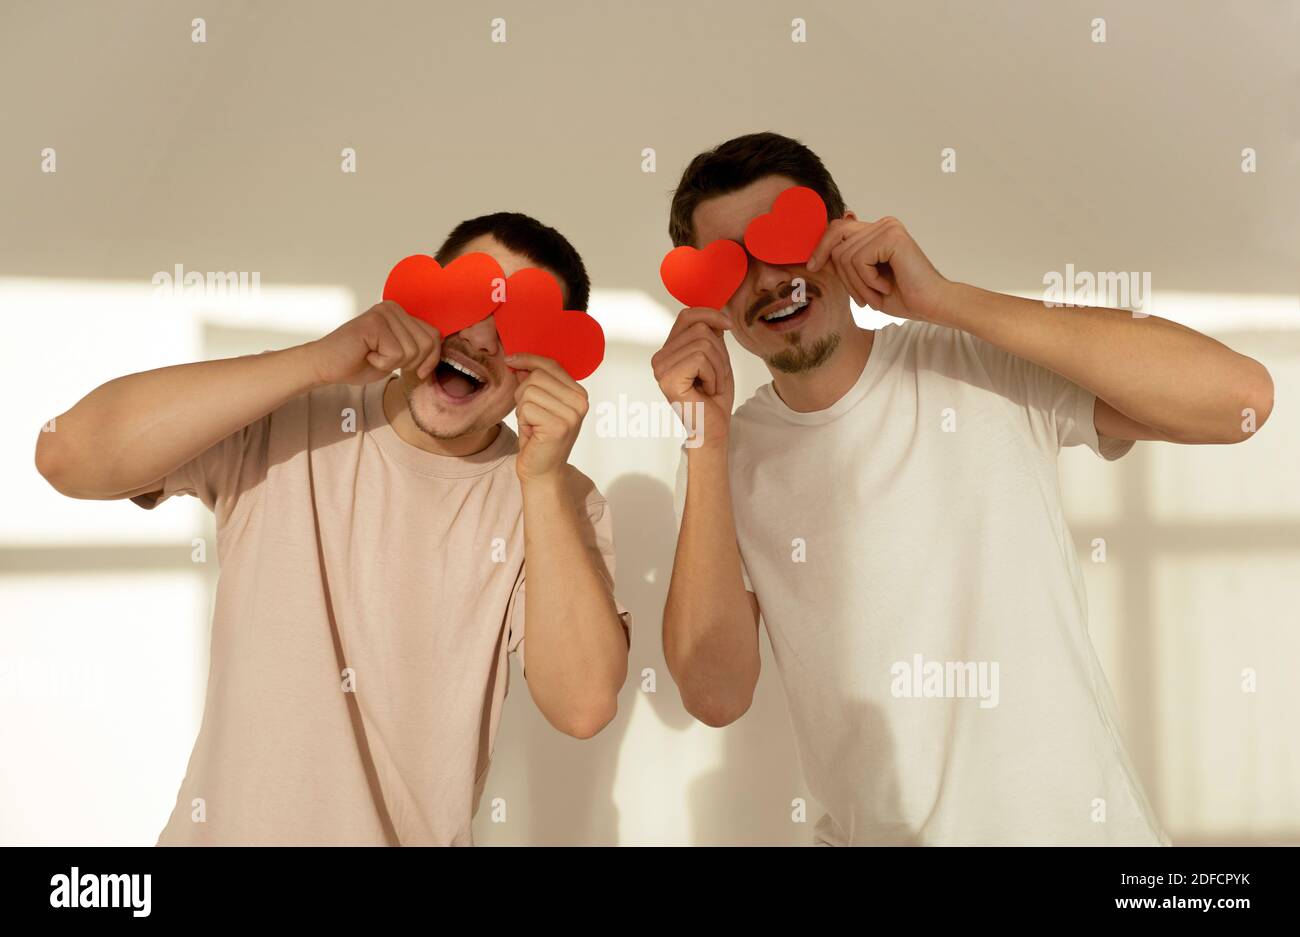 Happy couple of young gay men hide their eyes behind red paper valentine hearts in celebration at home against white wall background Stock Photo